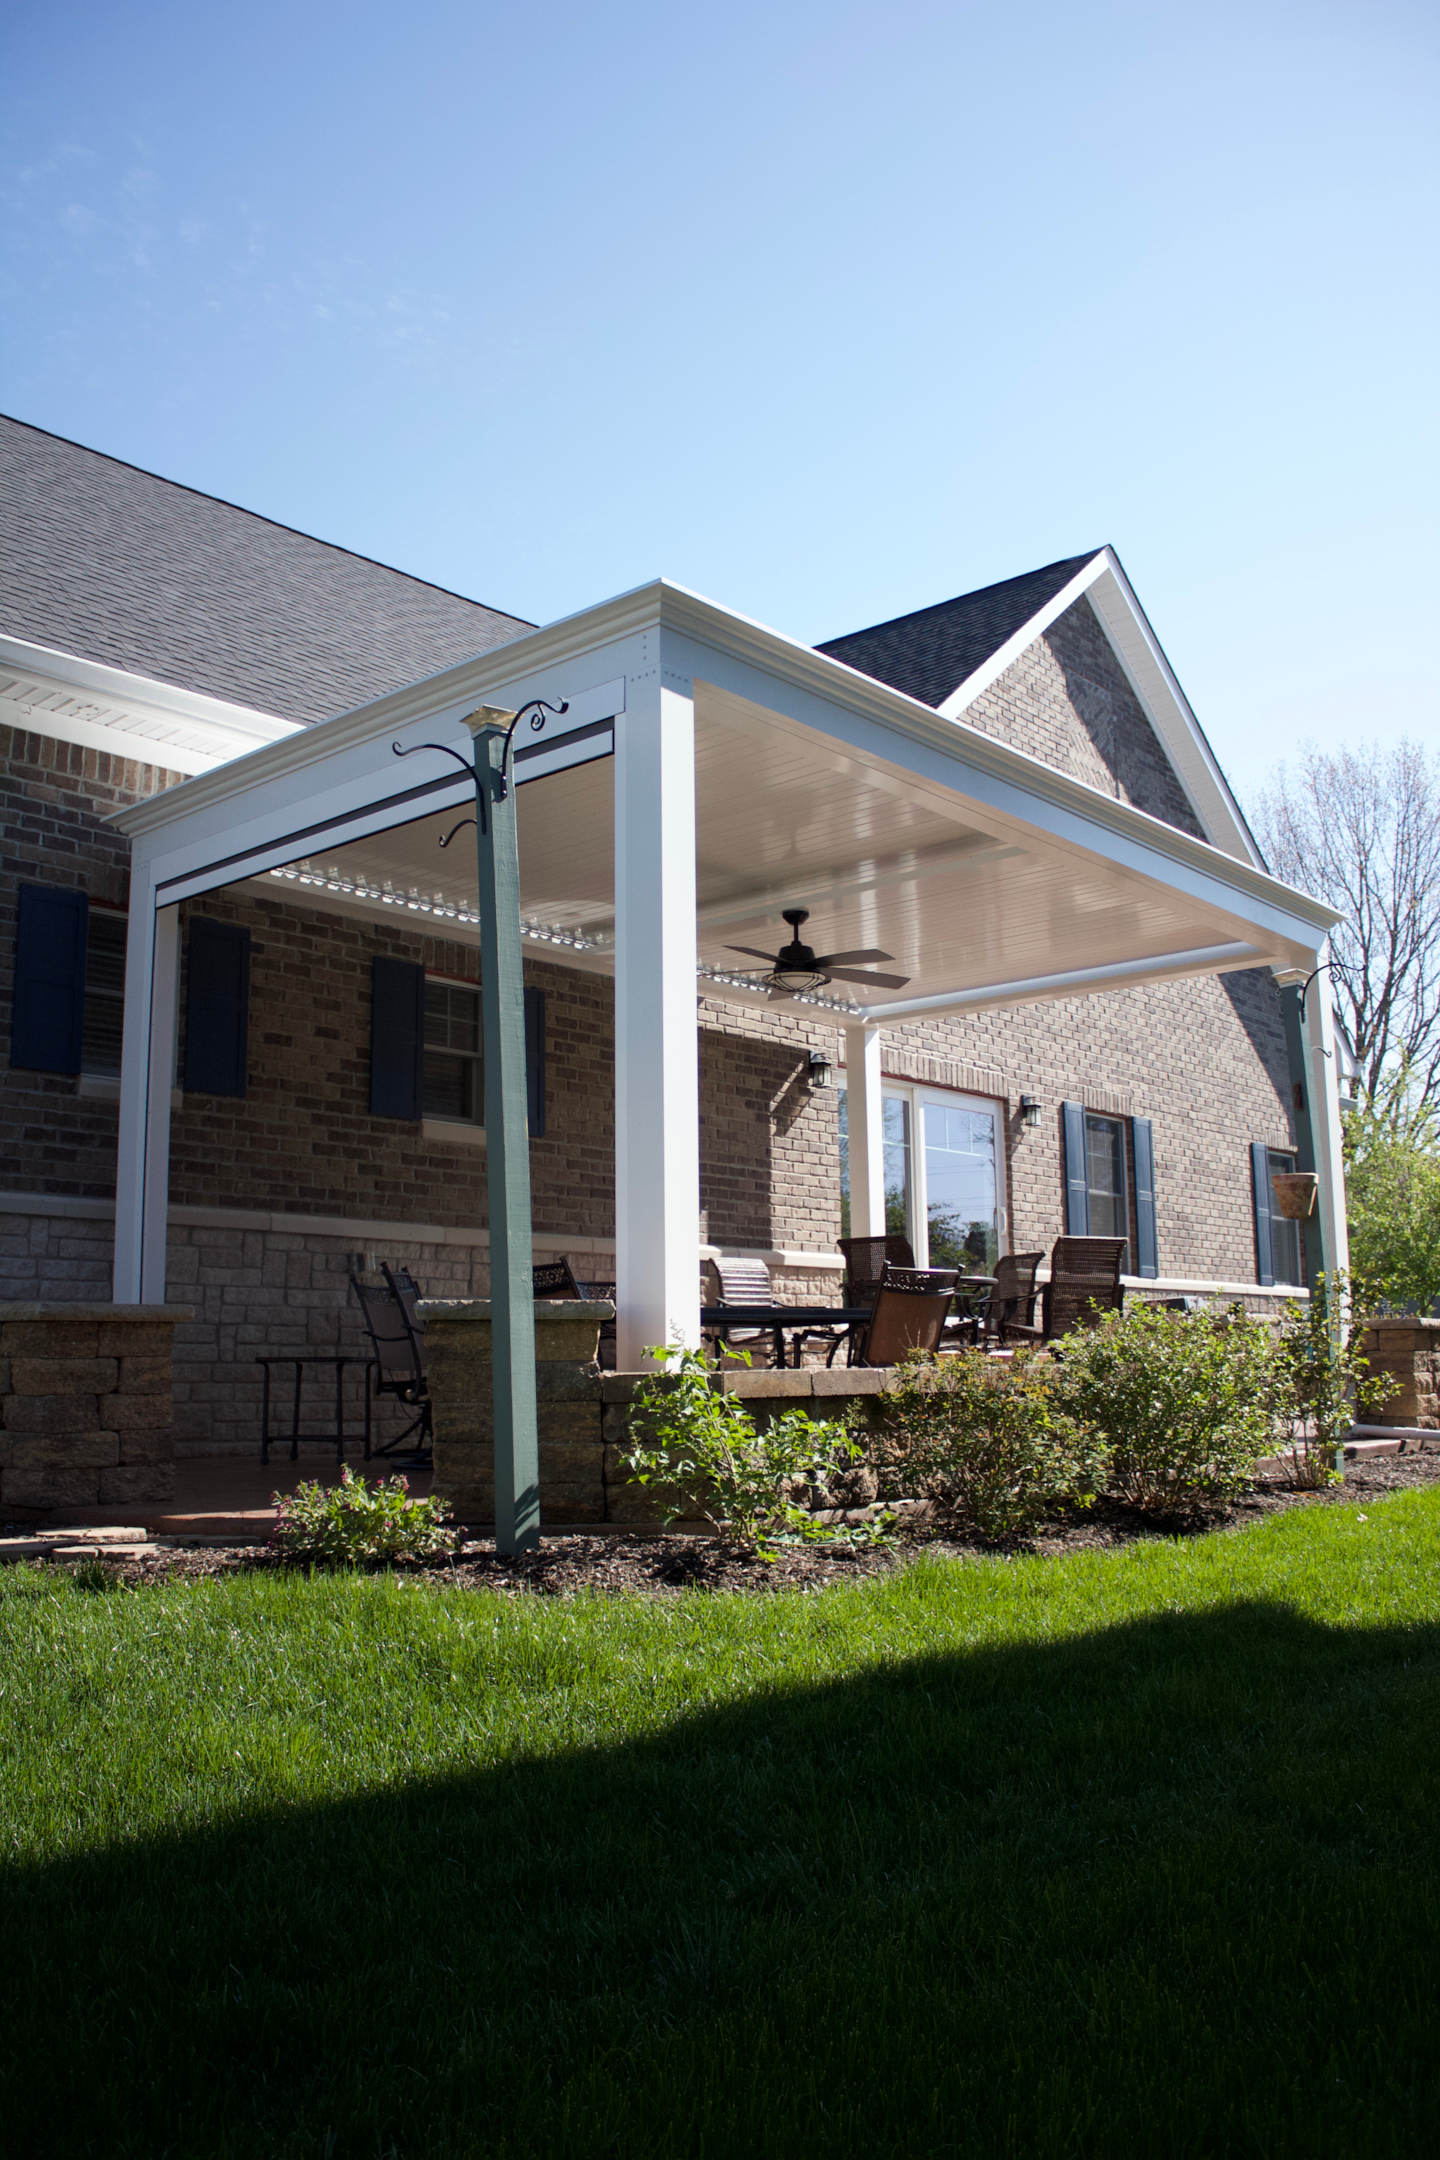 Patio covers can control the sun and provide shade, most times of the year.  Make sure your pergola has an integrated gutter system for drainage purposes.